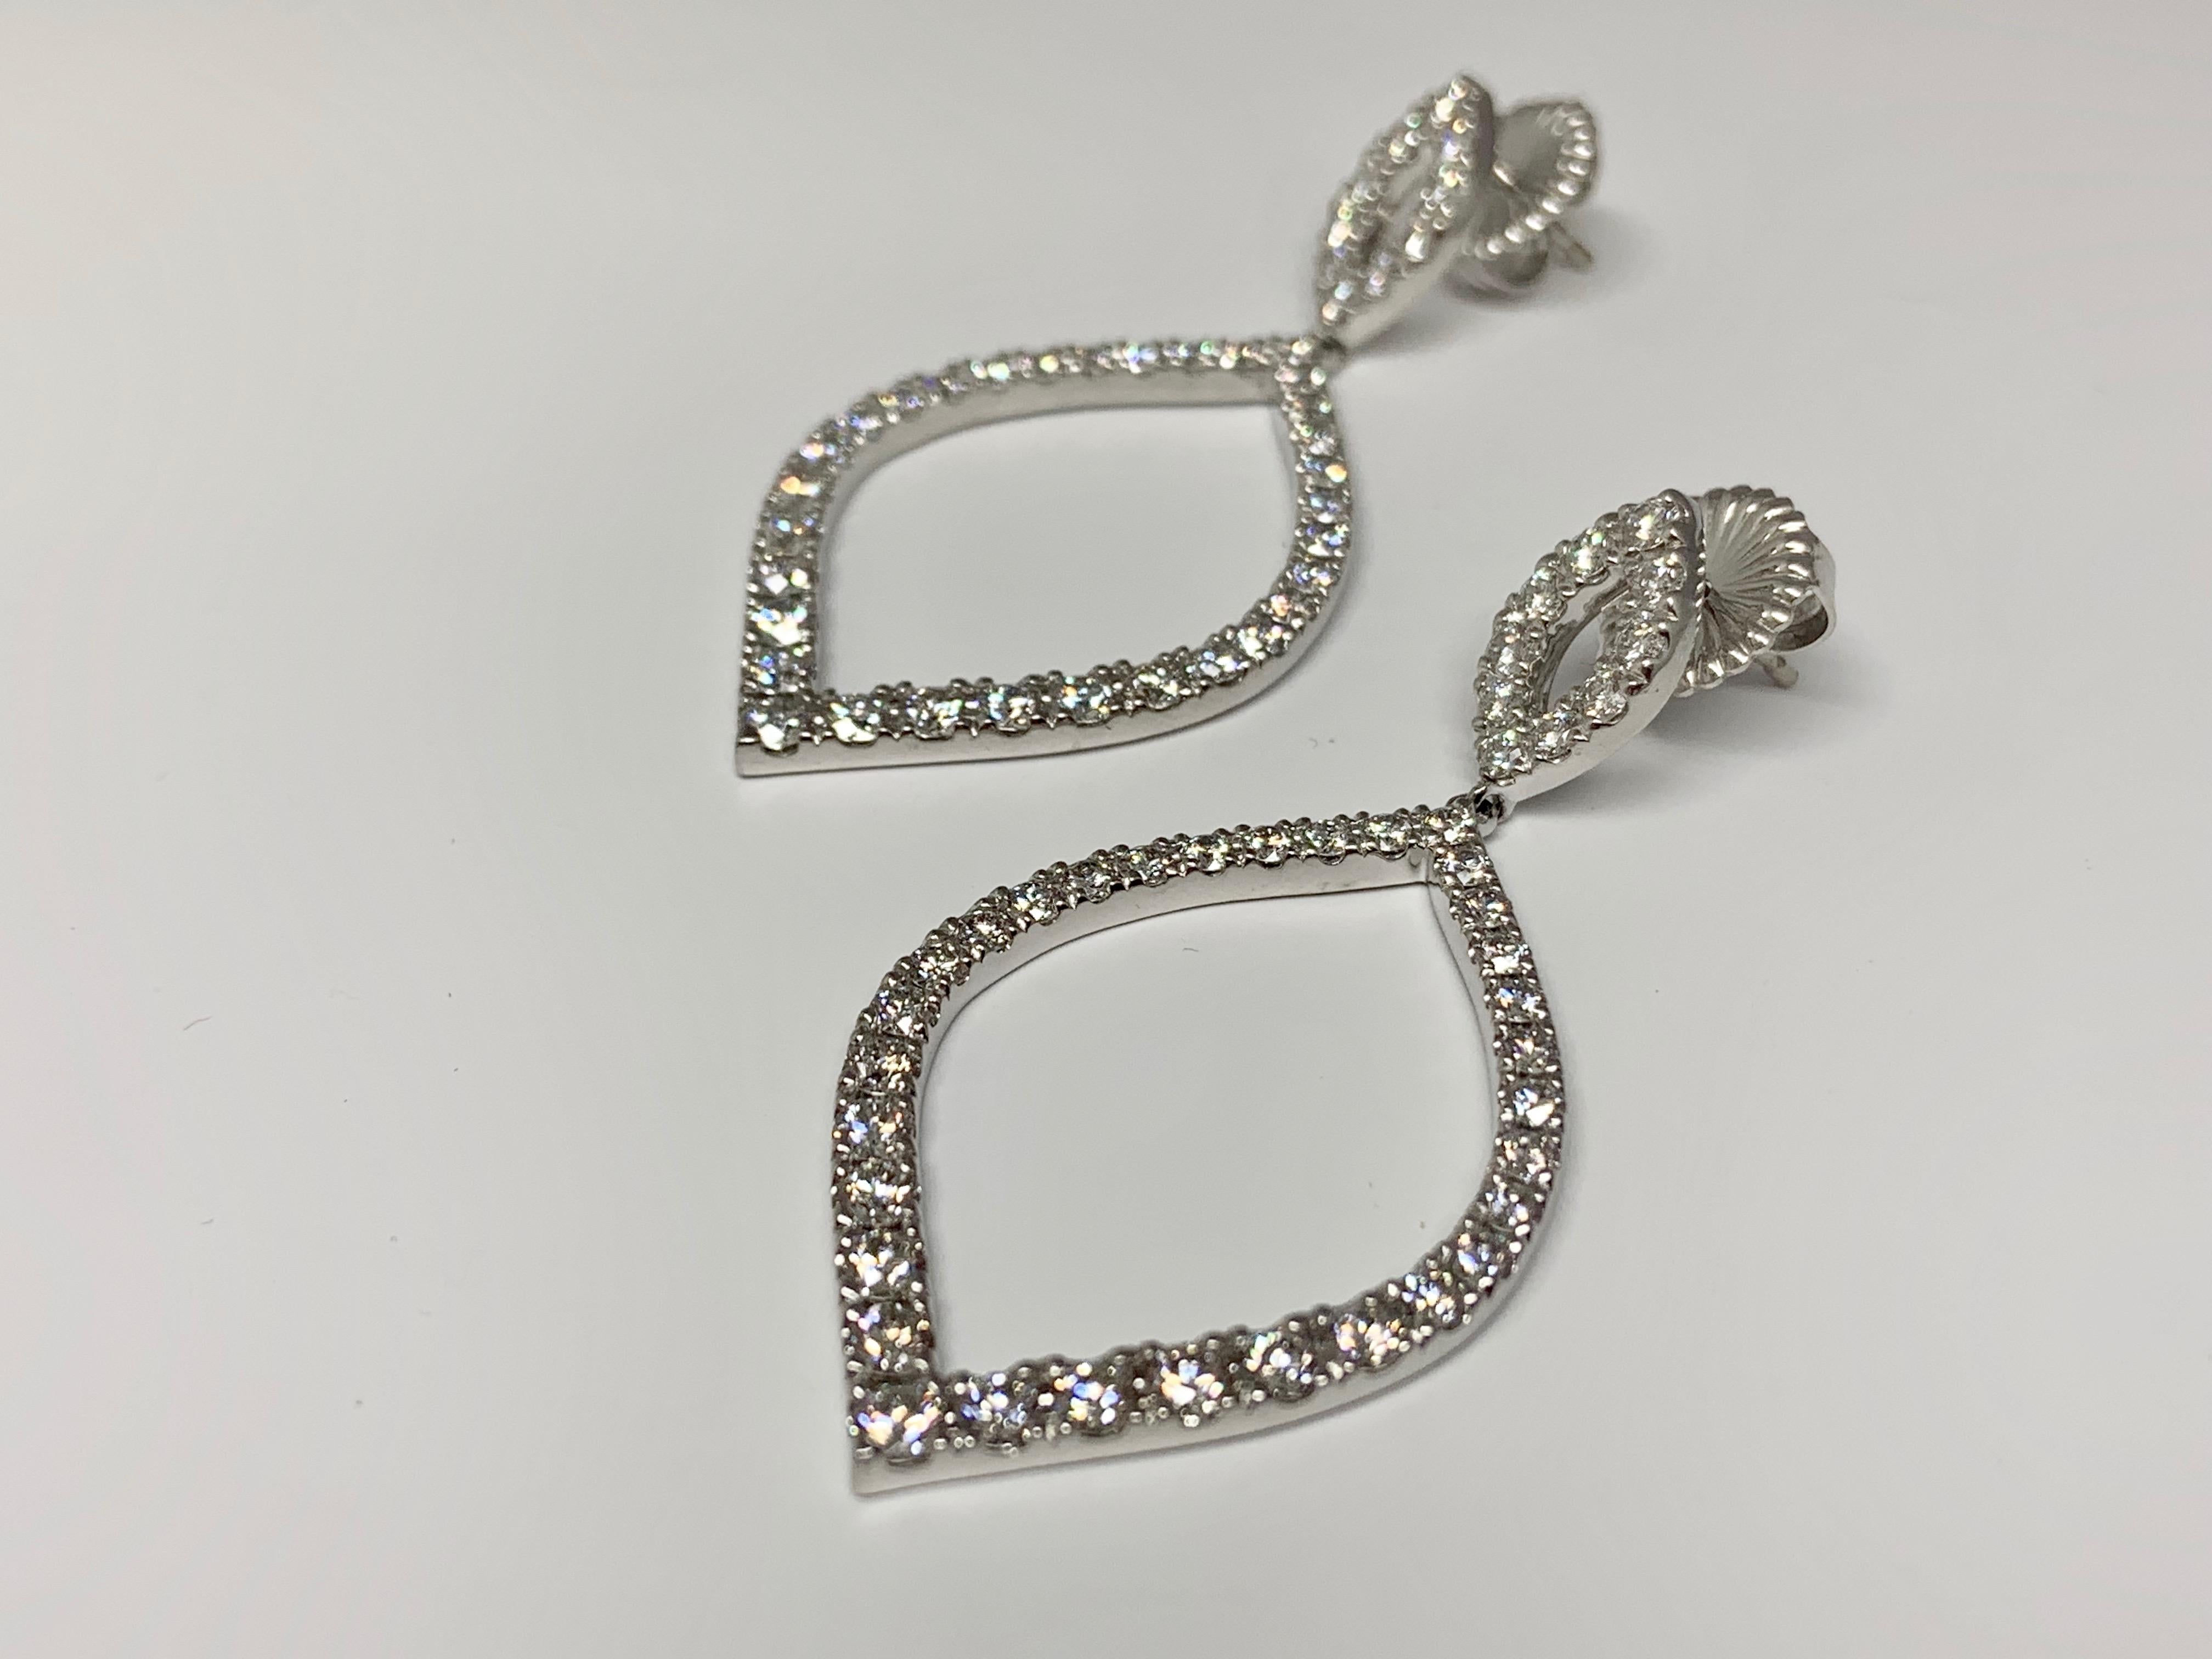 Hearts On Fire Provocative 3.43 carat round diamond drop earrings set in 18K white gold. These earrings are bold, beautiful, and perfect for events, weddings, or special occasions. This item will ship with a Hearts On Fire Certificate of